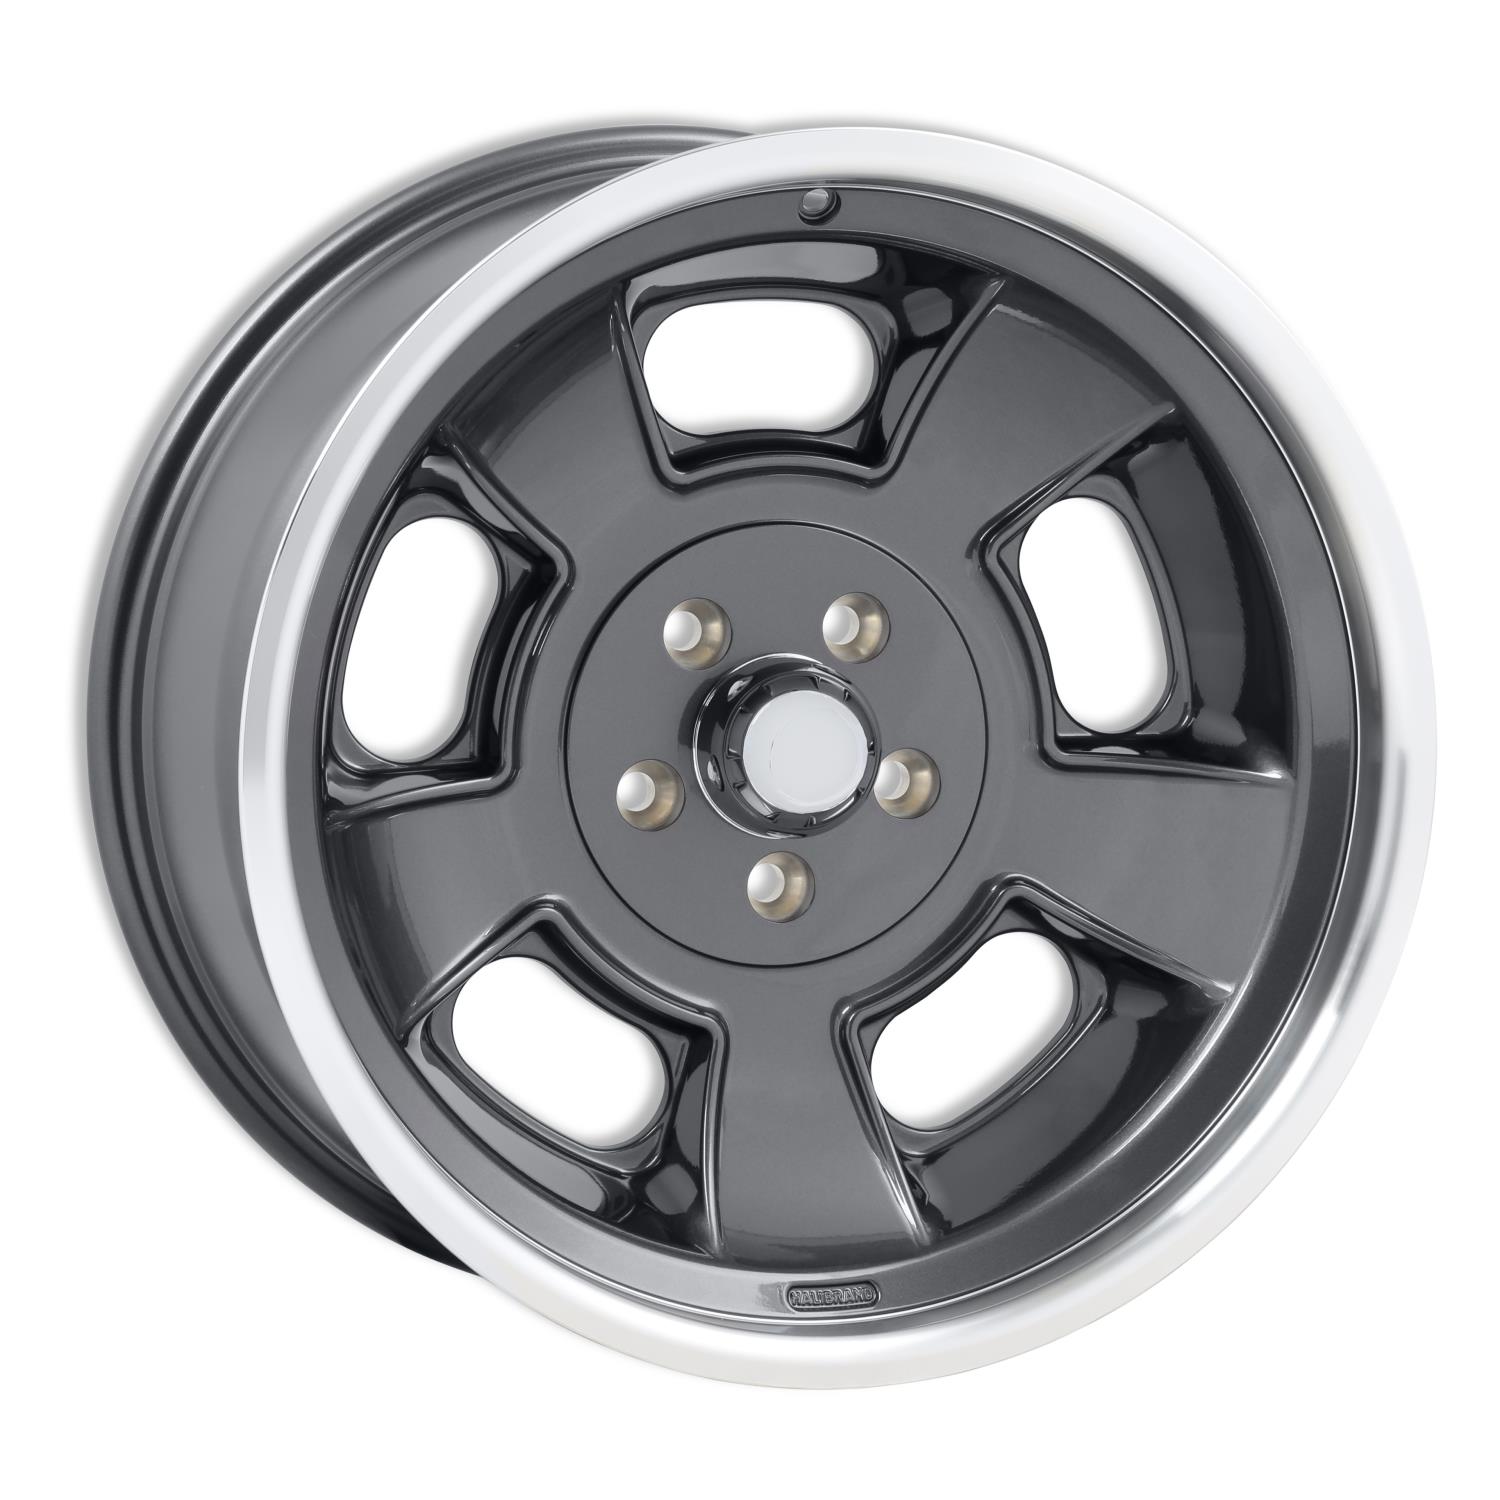 Sprint Rear Wheel, Size: 20x10", Bolt Pattern: 5x5", Backspace: 5.5" [Anthracite with Machined Lip - Gloss Clearcoat]